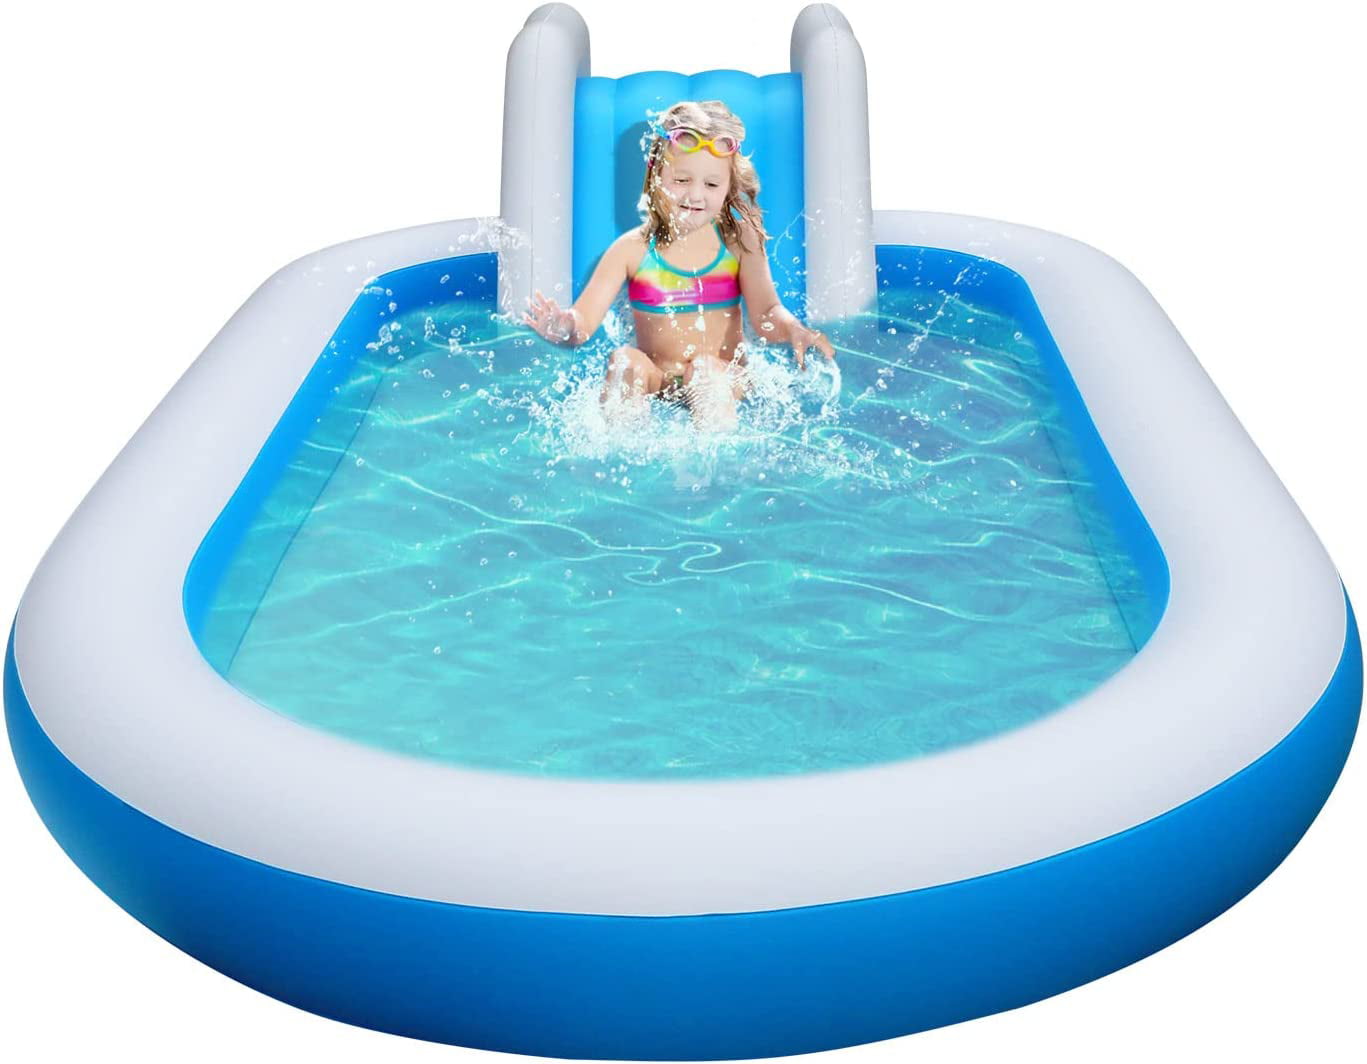 INFLATABLE 9FT OCTAGONAL FAMILY PADDLING POOL 1806L 